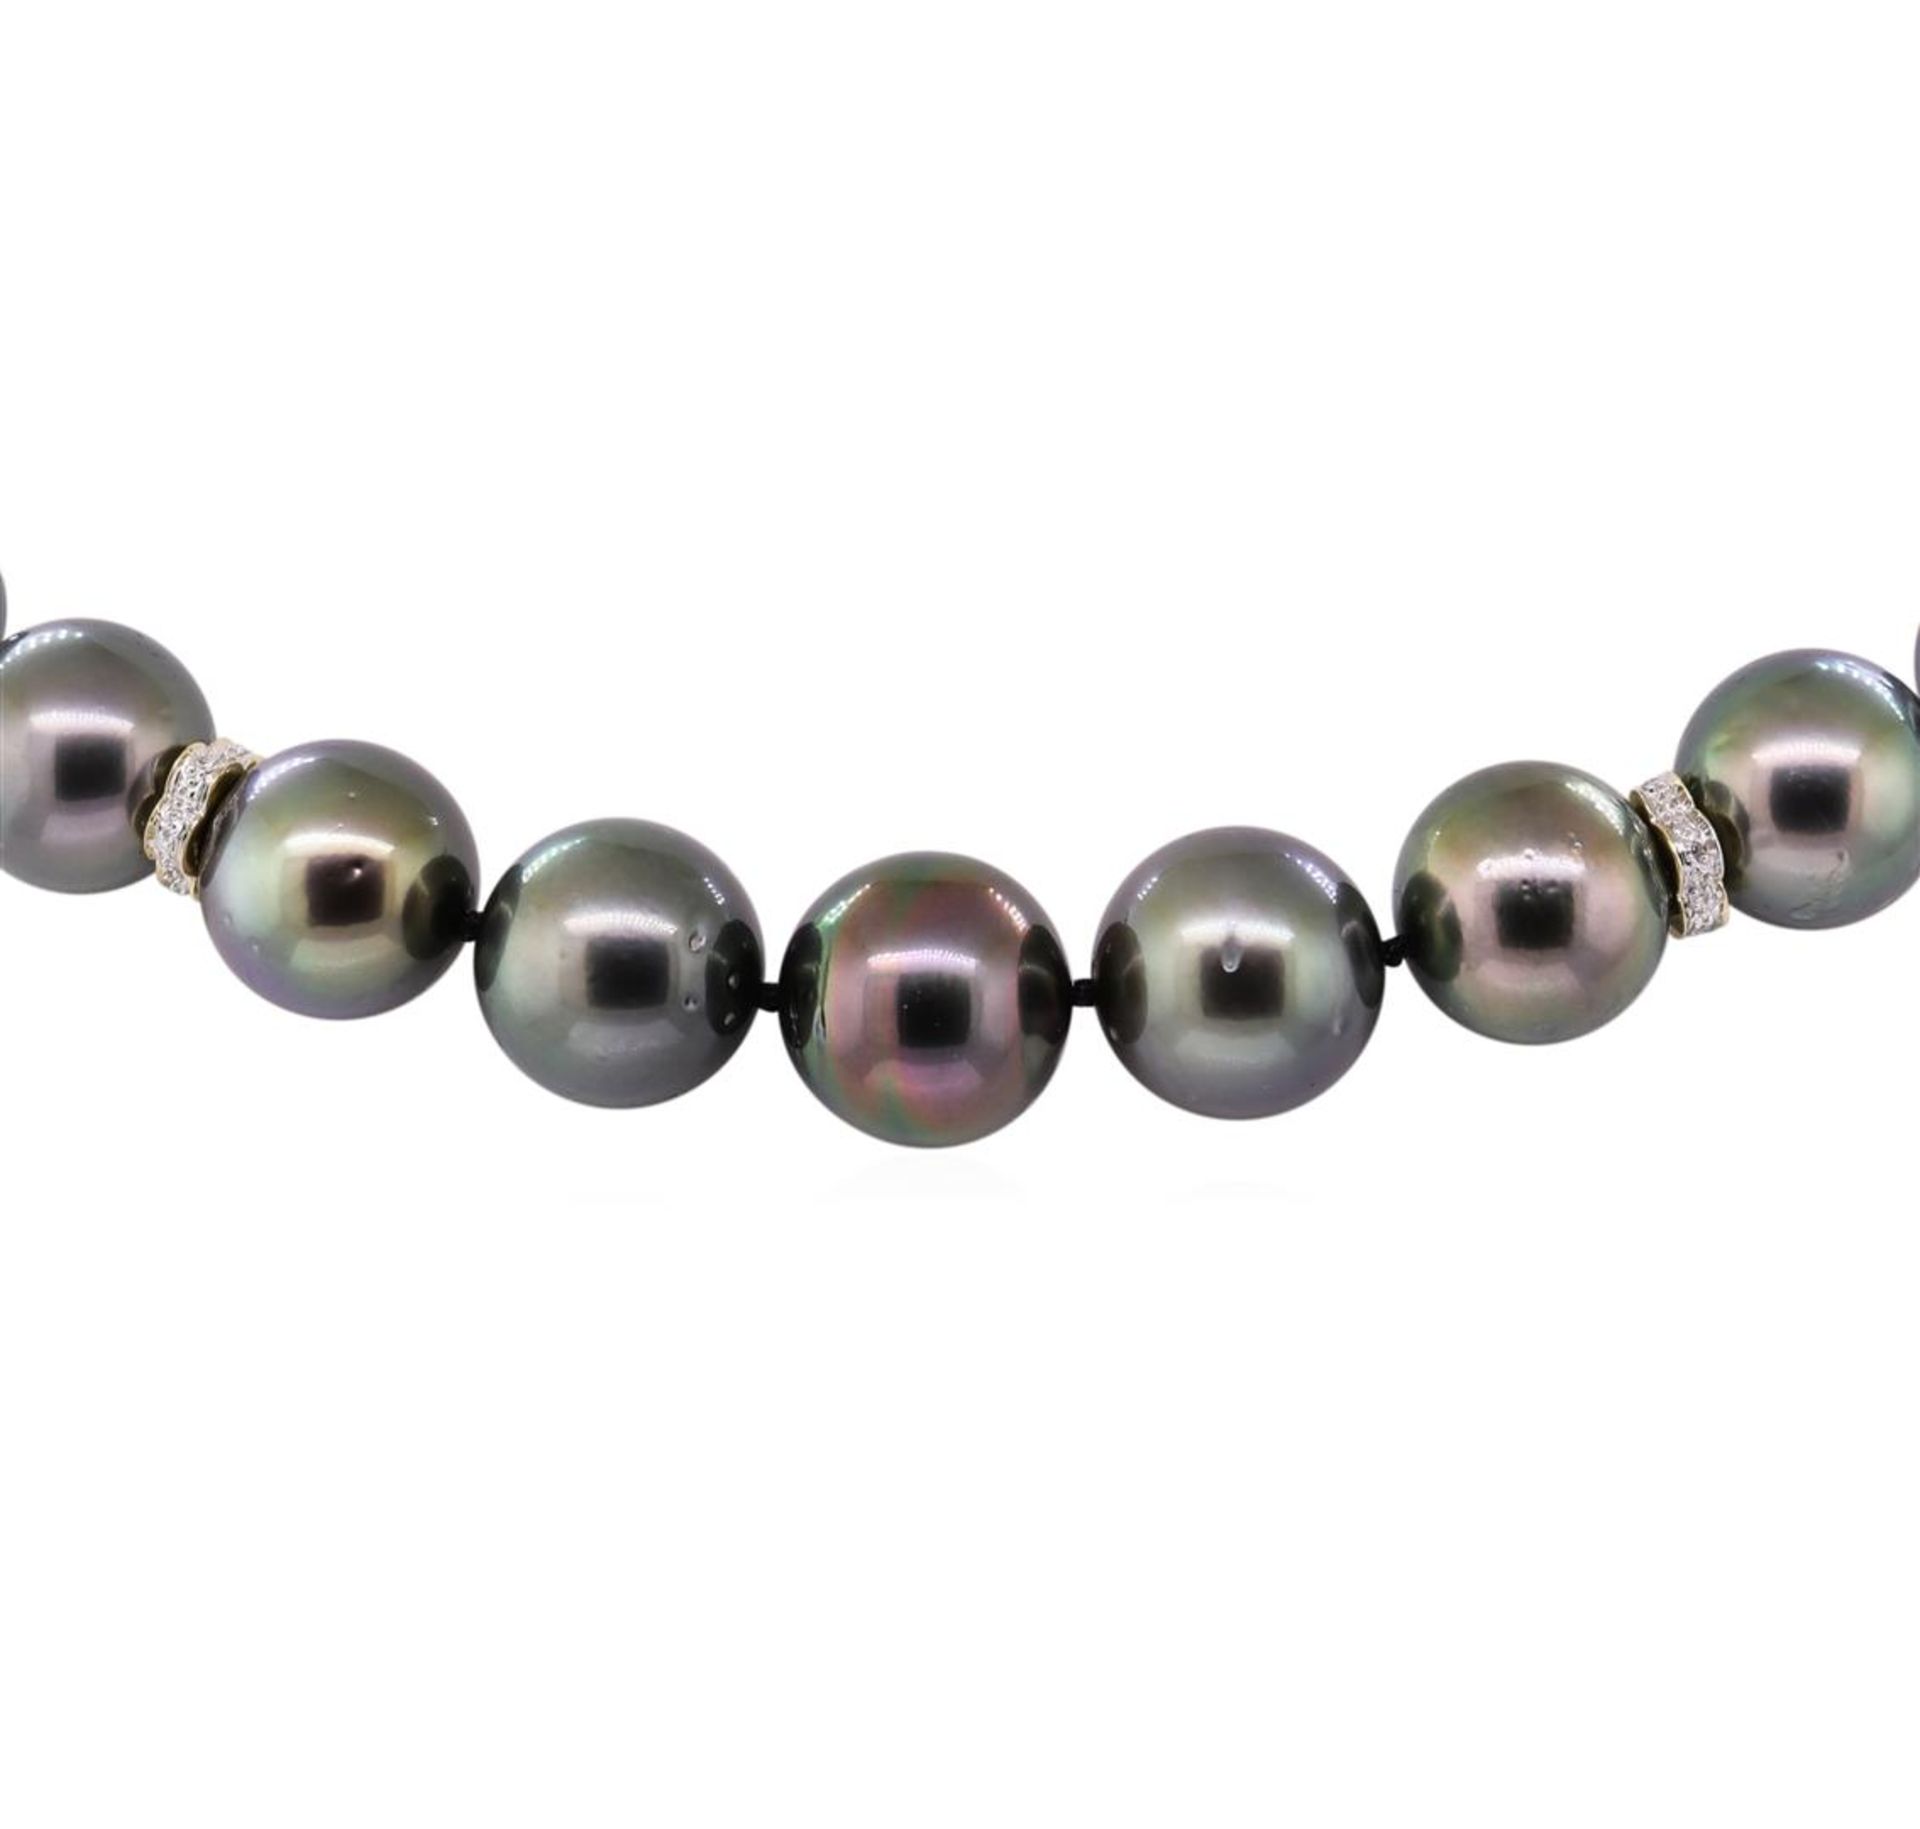 0.50 ctw Diamond and Tahitian Pearl Necklace - 14KT Yellow Gold - Image 2 of 4